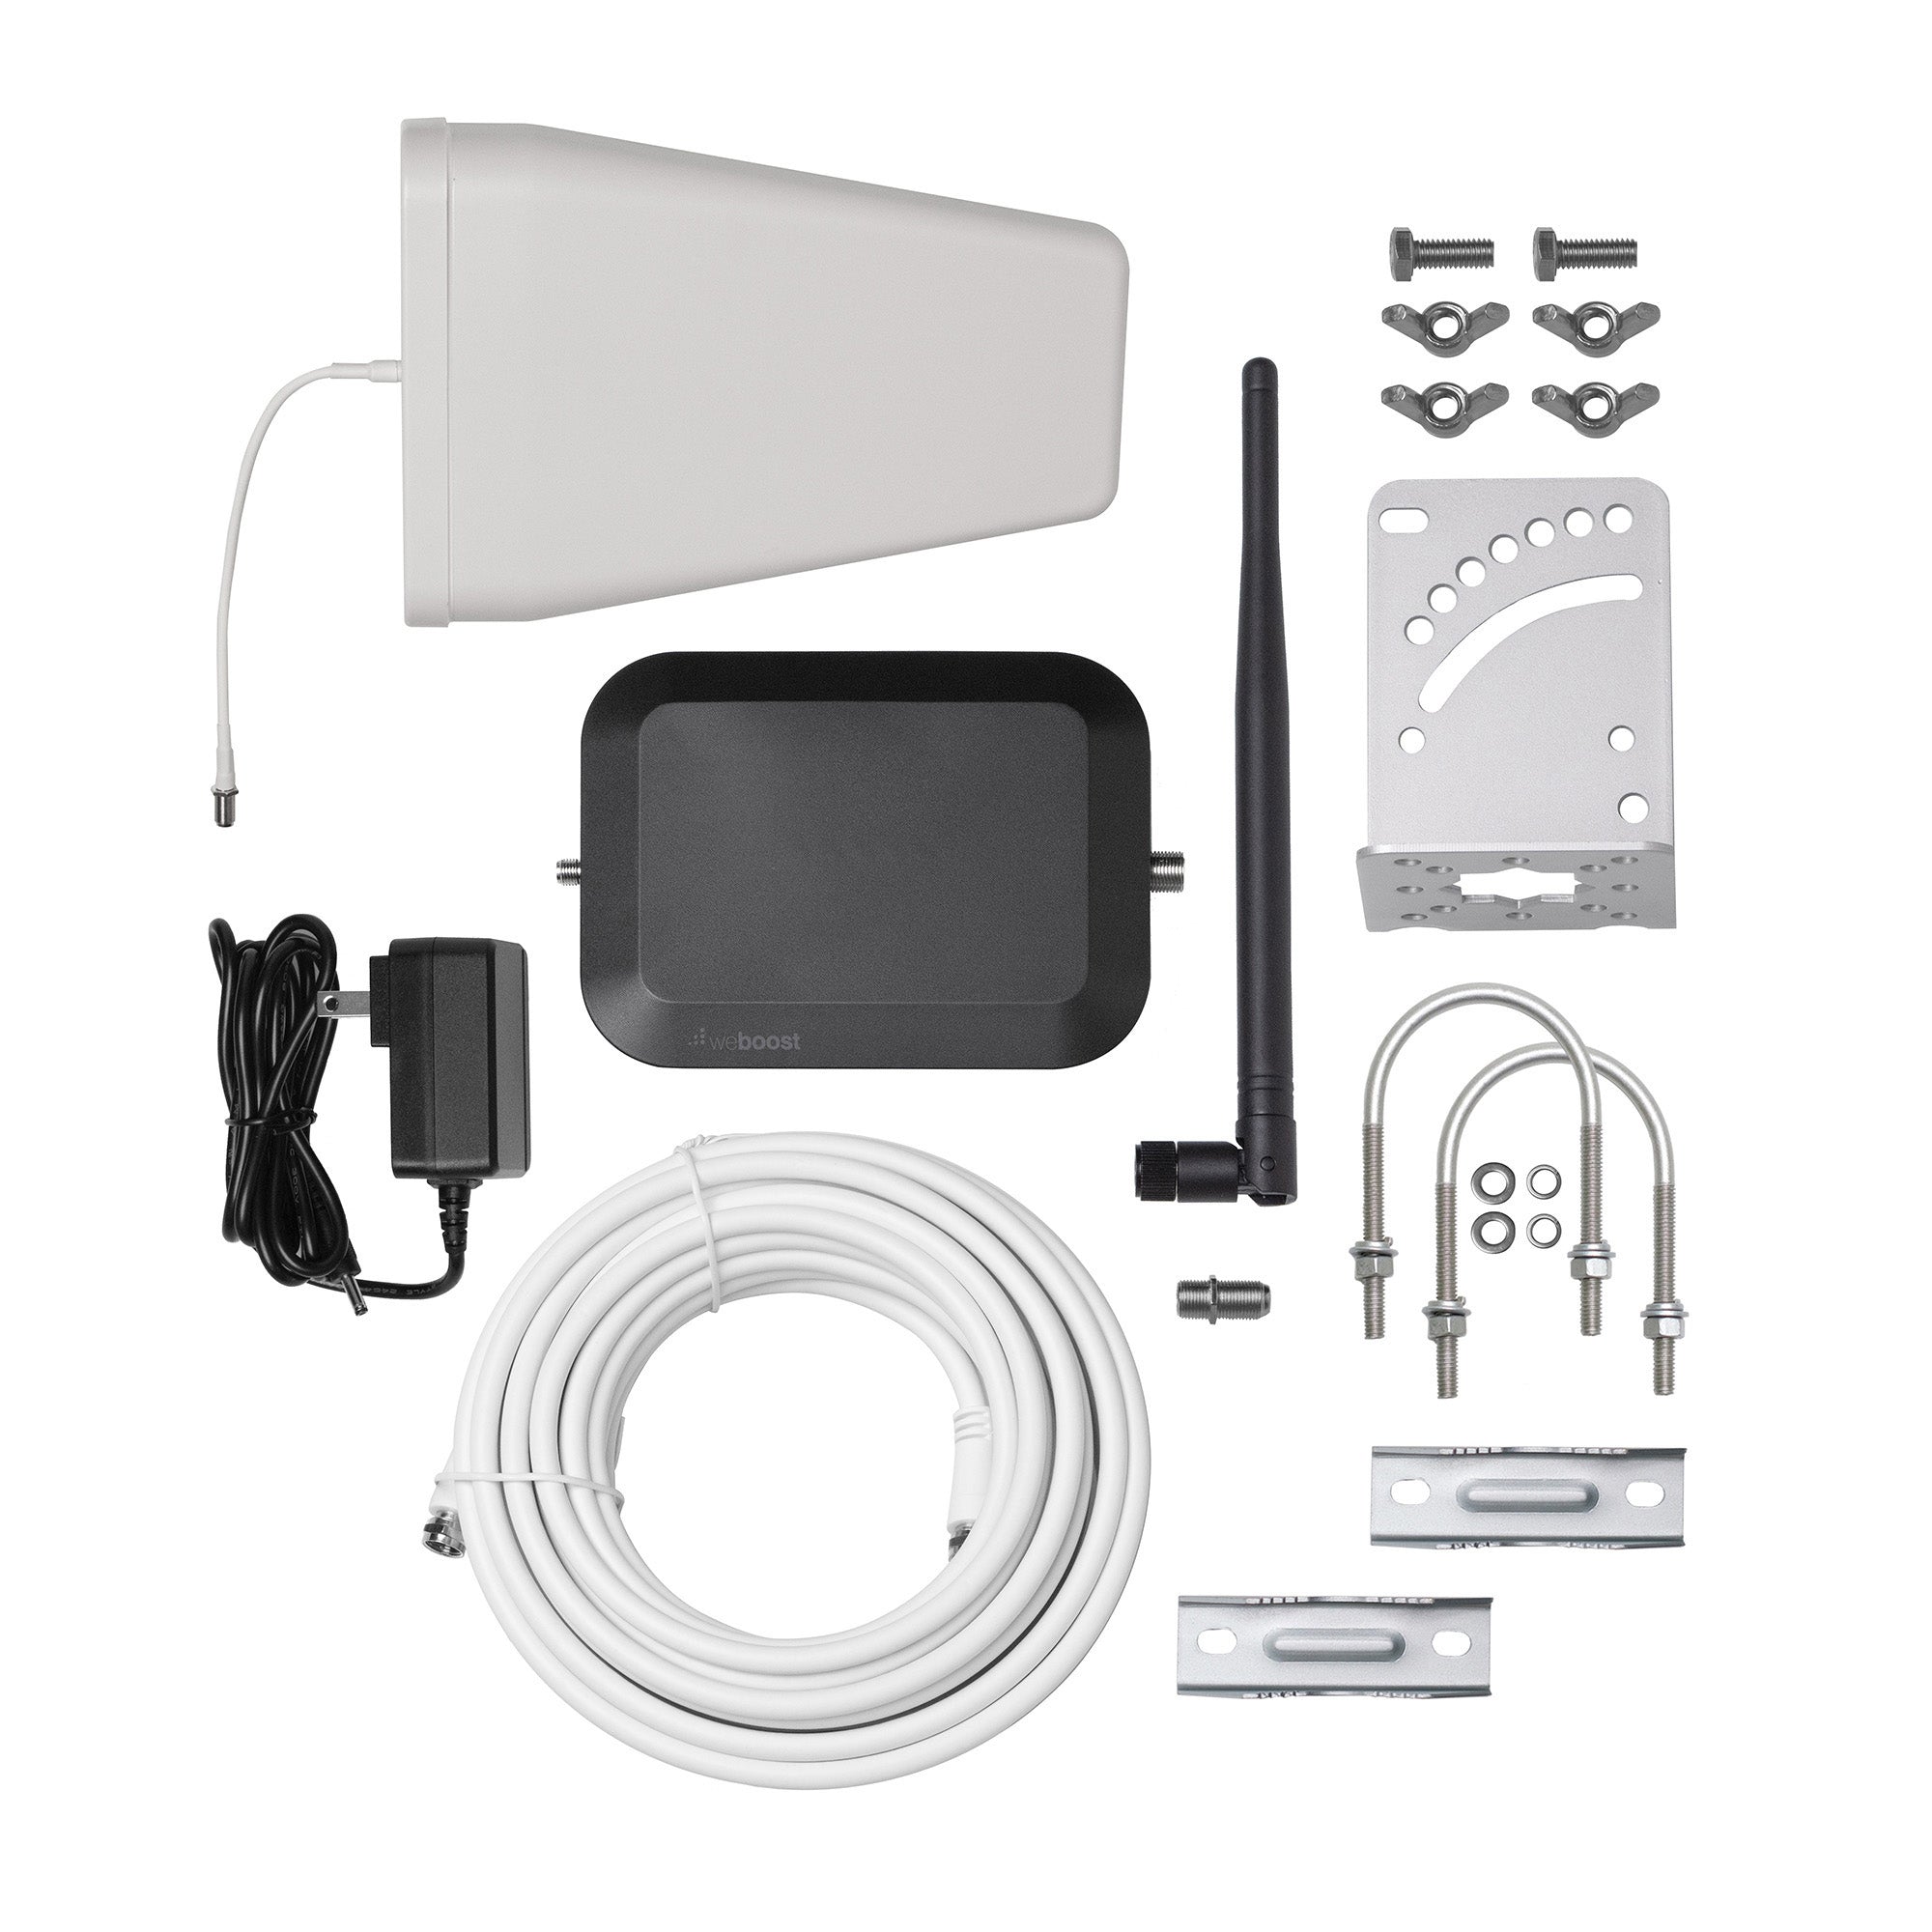 WeBoost Home Studio In-Building Signal Booster Kit - 15-08494